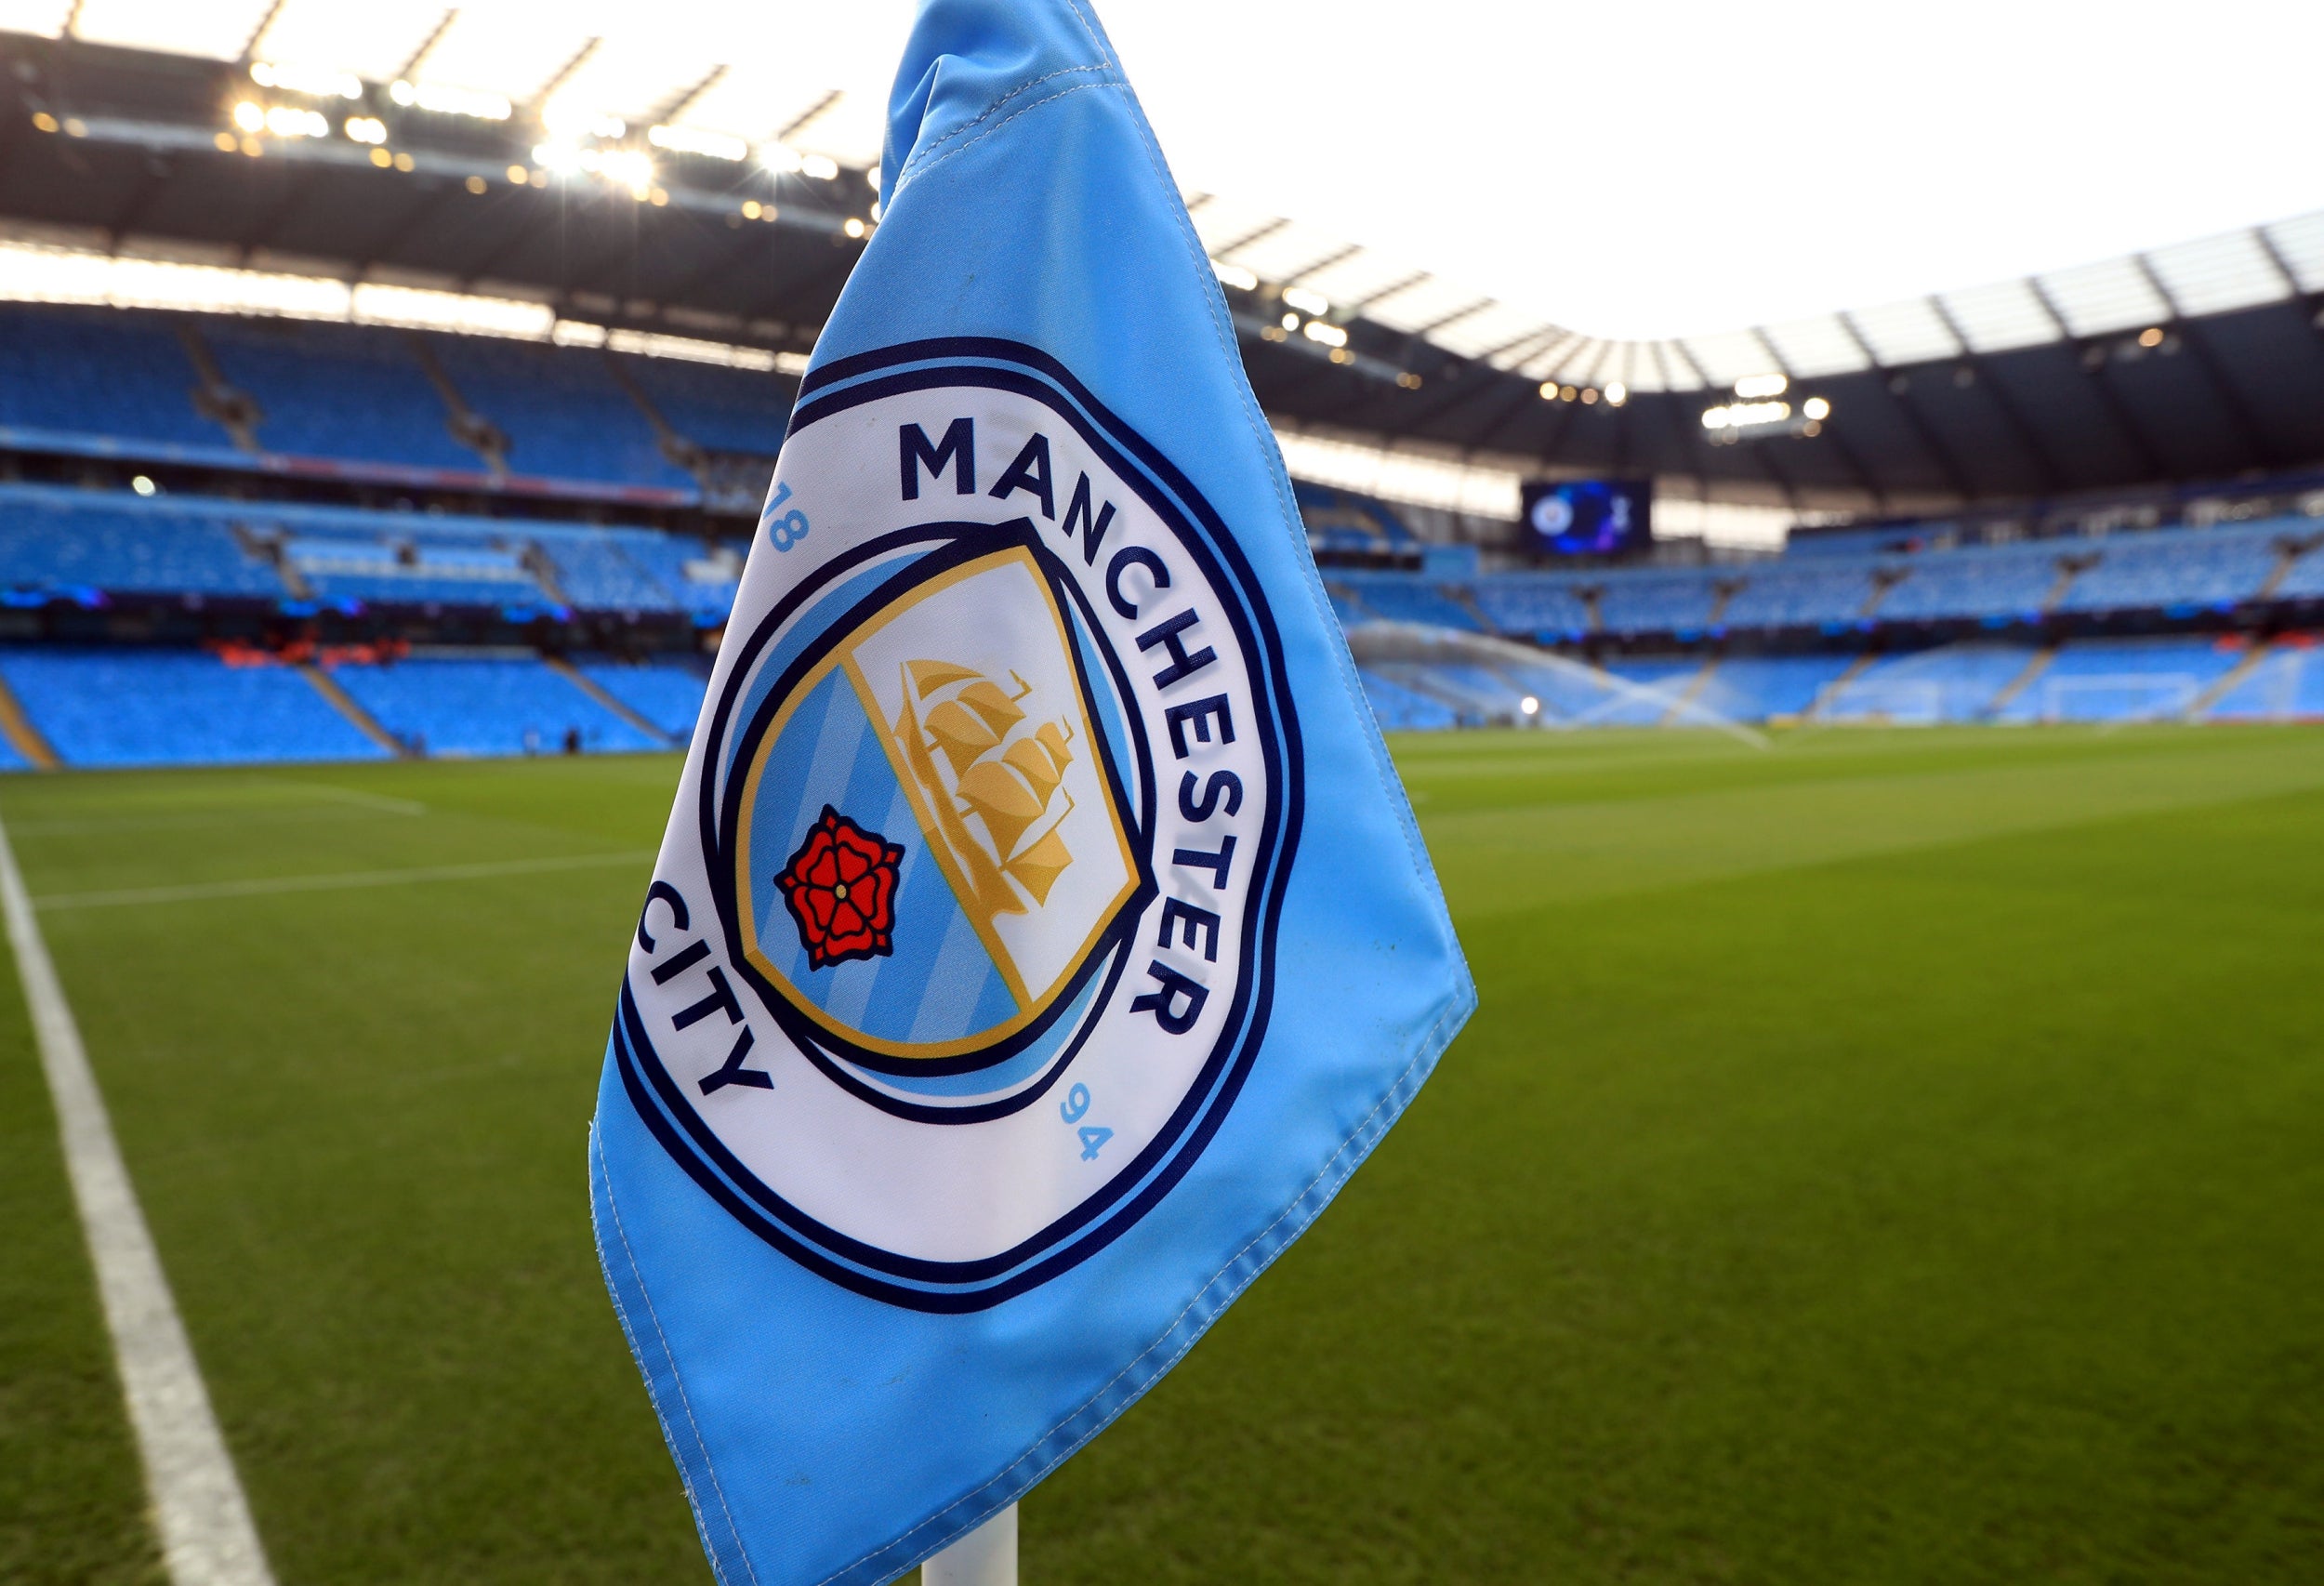 Why have Manchester City been banned from the Champions League and what comes next?